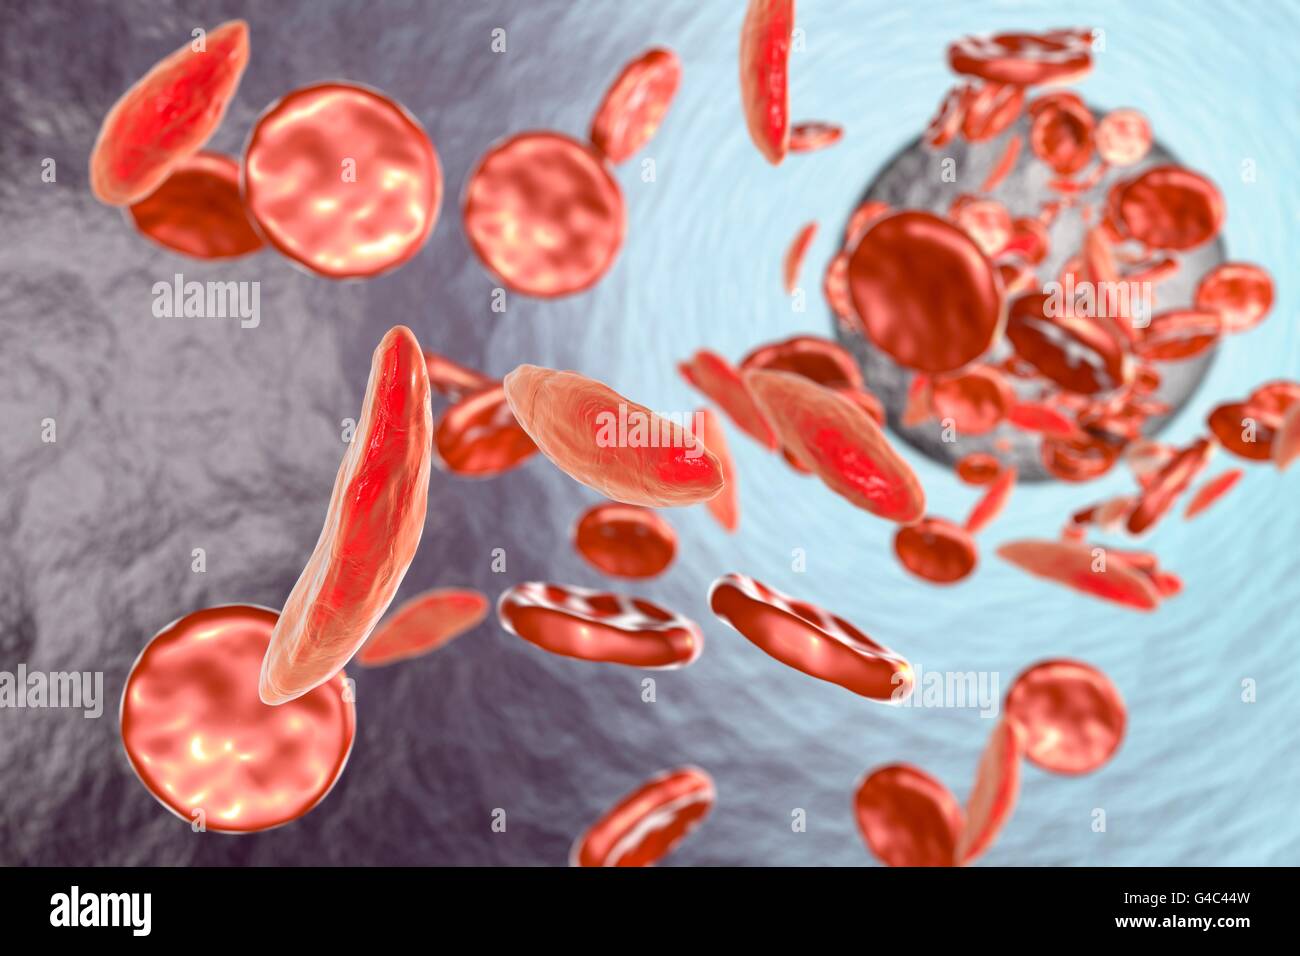 Sickle cell anaemia. Artwork showing normal red blood cells (round), and red blood cells affected by sickle cell anaemia (crescent shaped). This is a disease in which the red blood cells contain an abnormal form of haemoglobin (blood's oxygen-carrying pigment) that causes the blood cells to become sickle-shaped, rather than round. Sickle cells cannot move through small blood vessels as easily as normal cells and so can cause blockages (right). This prevents oxygen from reaching the tissues, causing severe pain and organ damage. Stock Photo